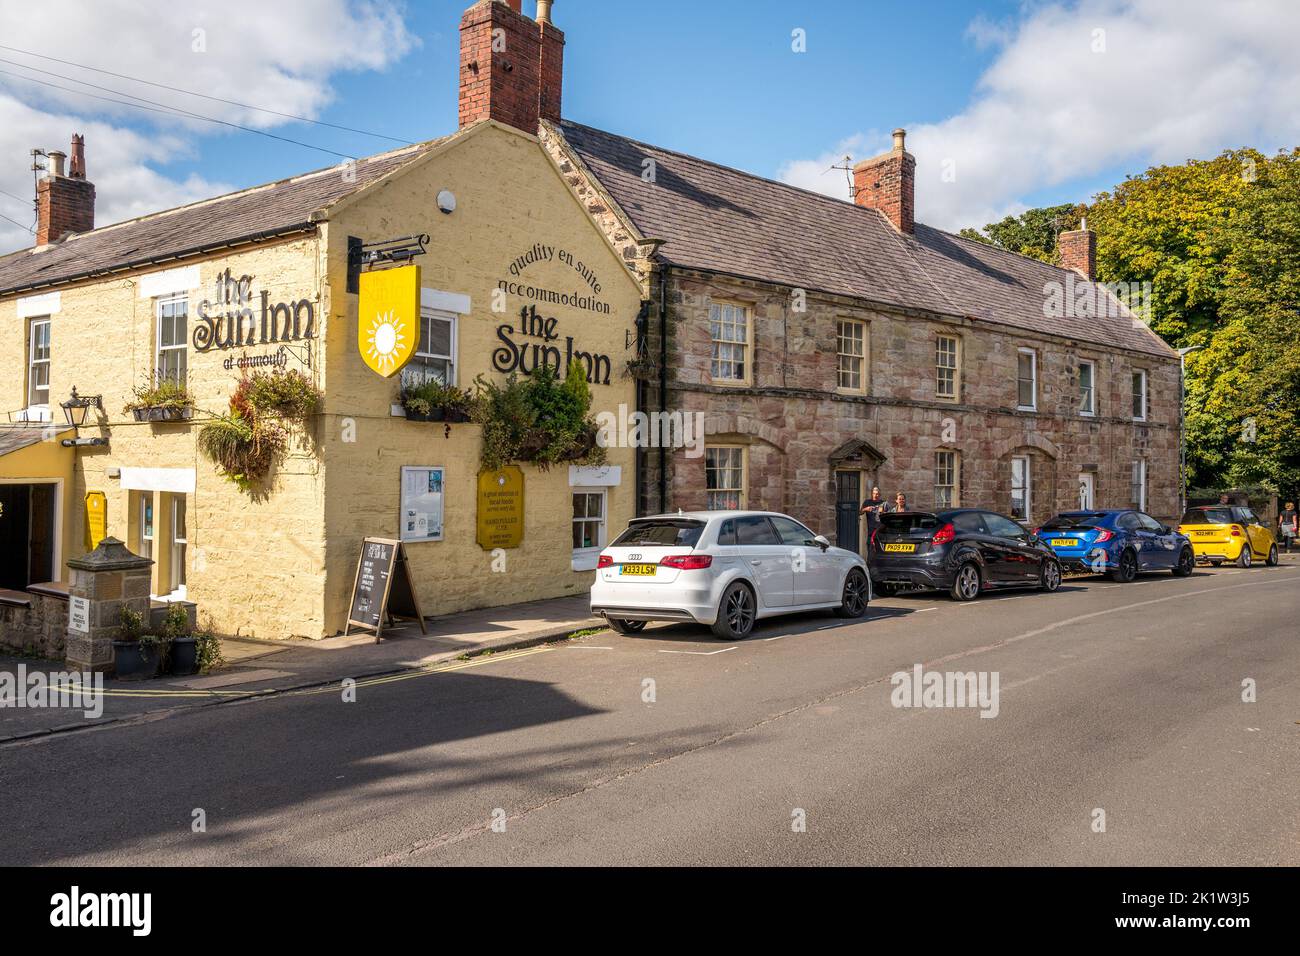 The Star Inn, a public house or pub in the coastal village of Alnmouth, Northumberland, England, UK Stock Photo